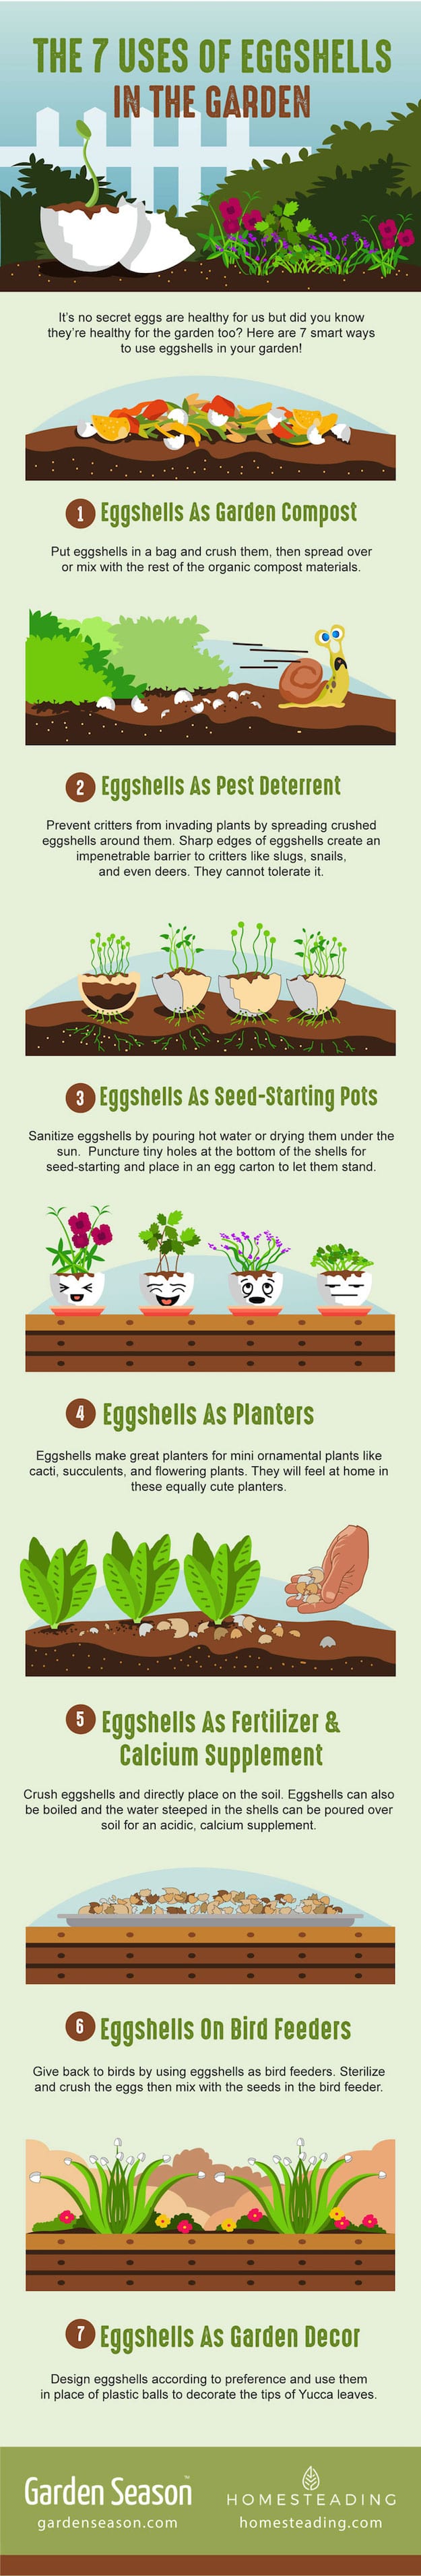 The 7 uses of eggshells in the garden | How To Use Eggshells In The Garden | Cost-Cutting Gardening Hacks